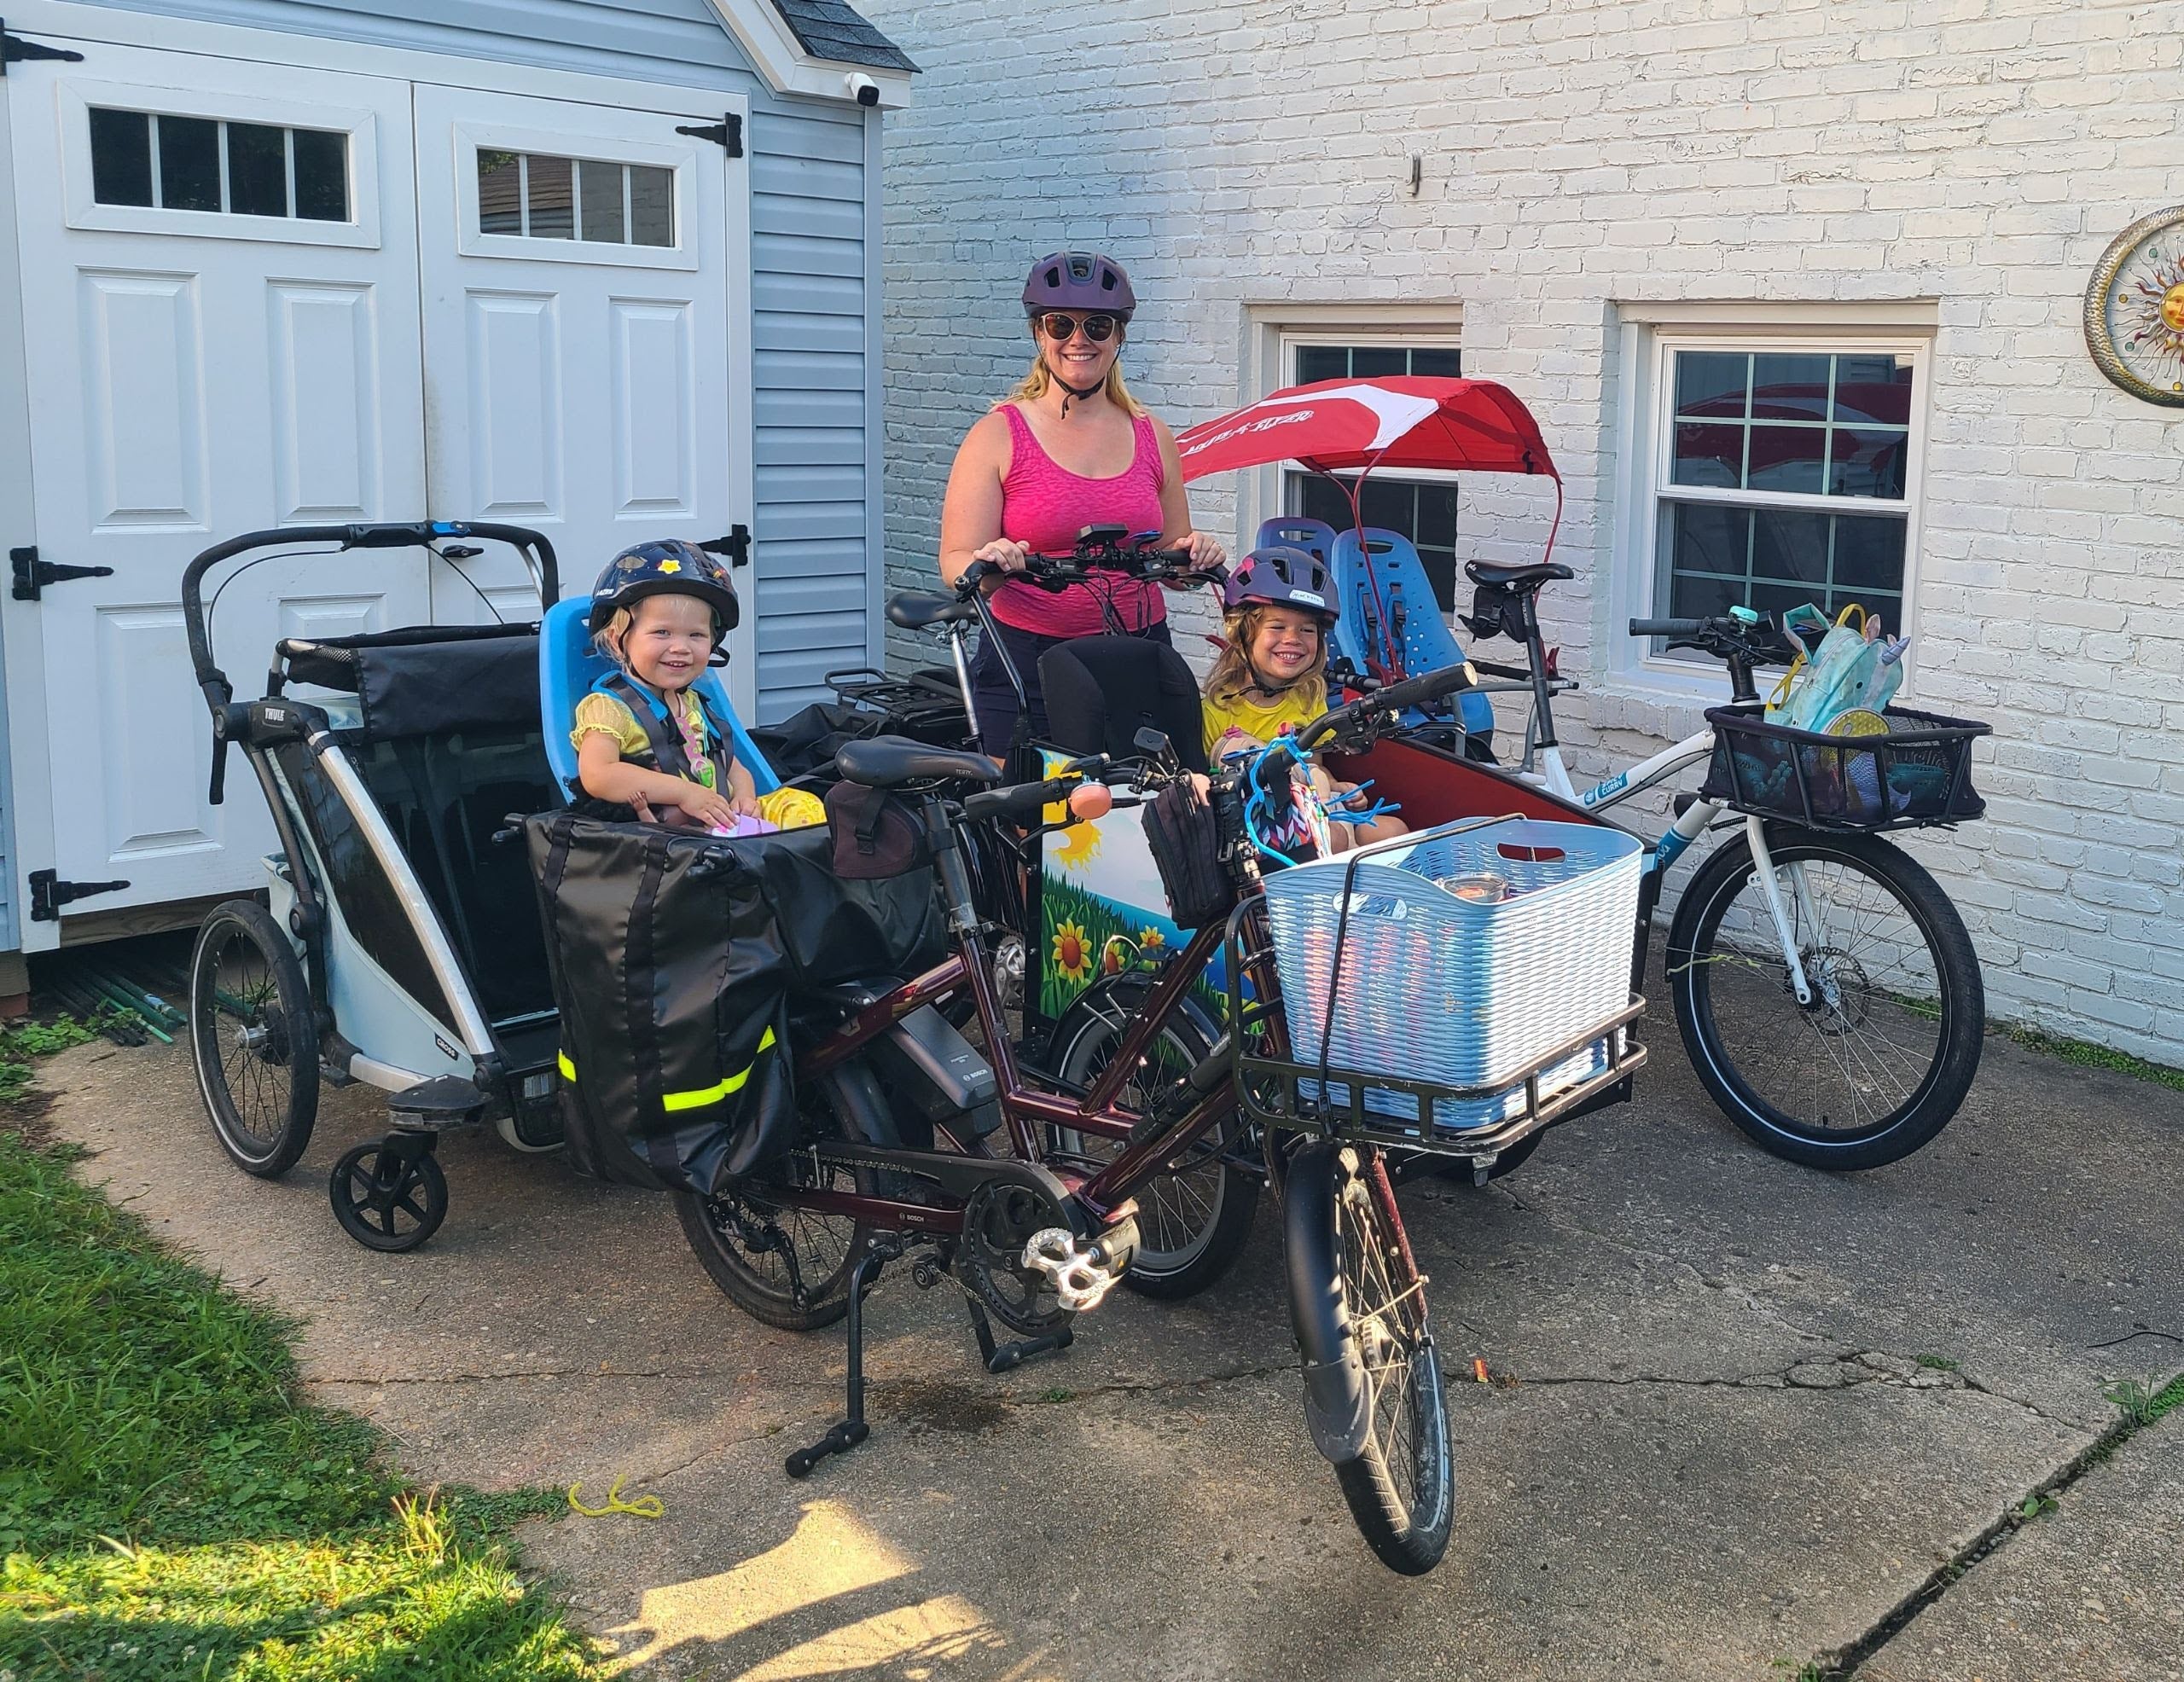 How did you choose your cargo bike?